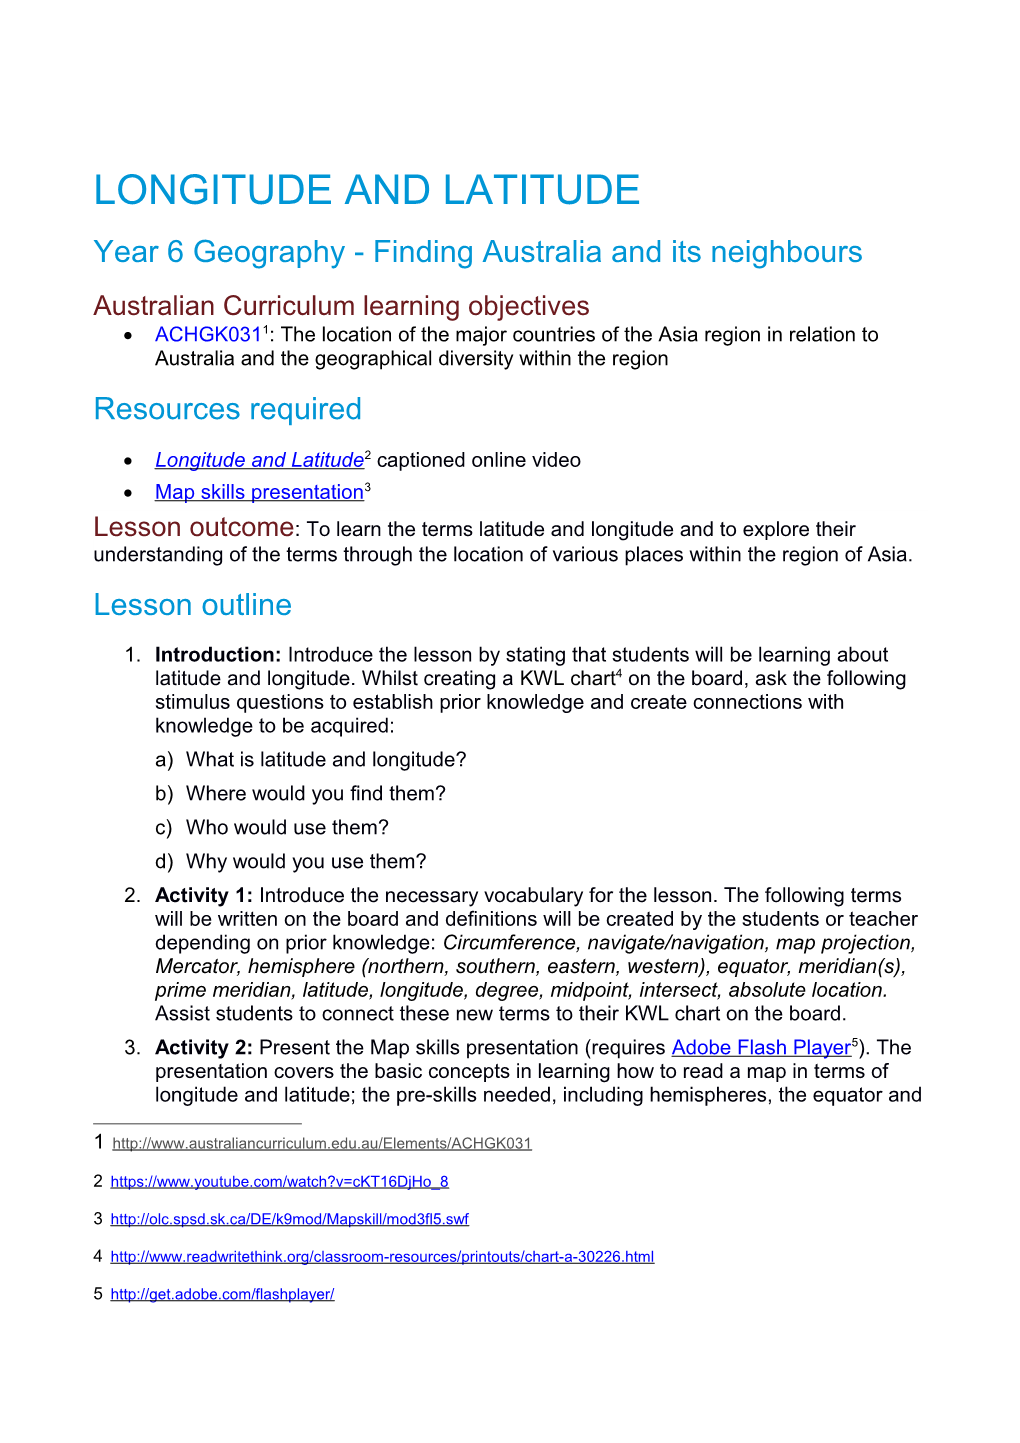 Year 6 Geography - Finding Australia and Its Neighbours